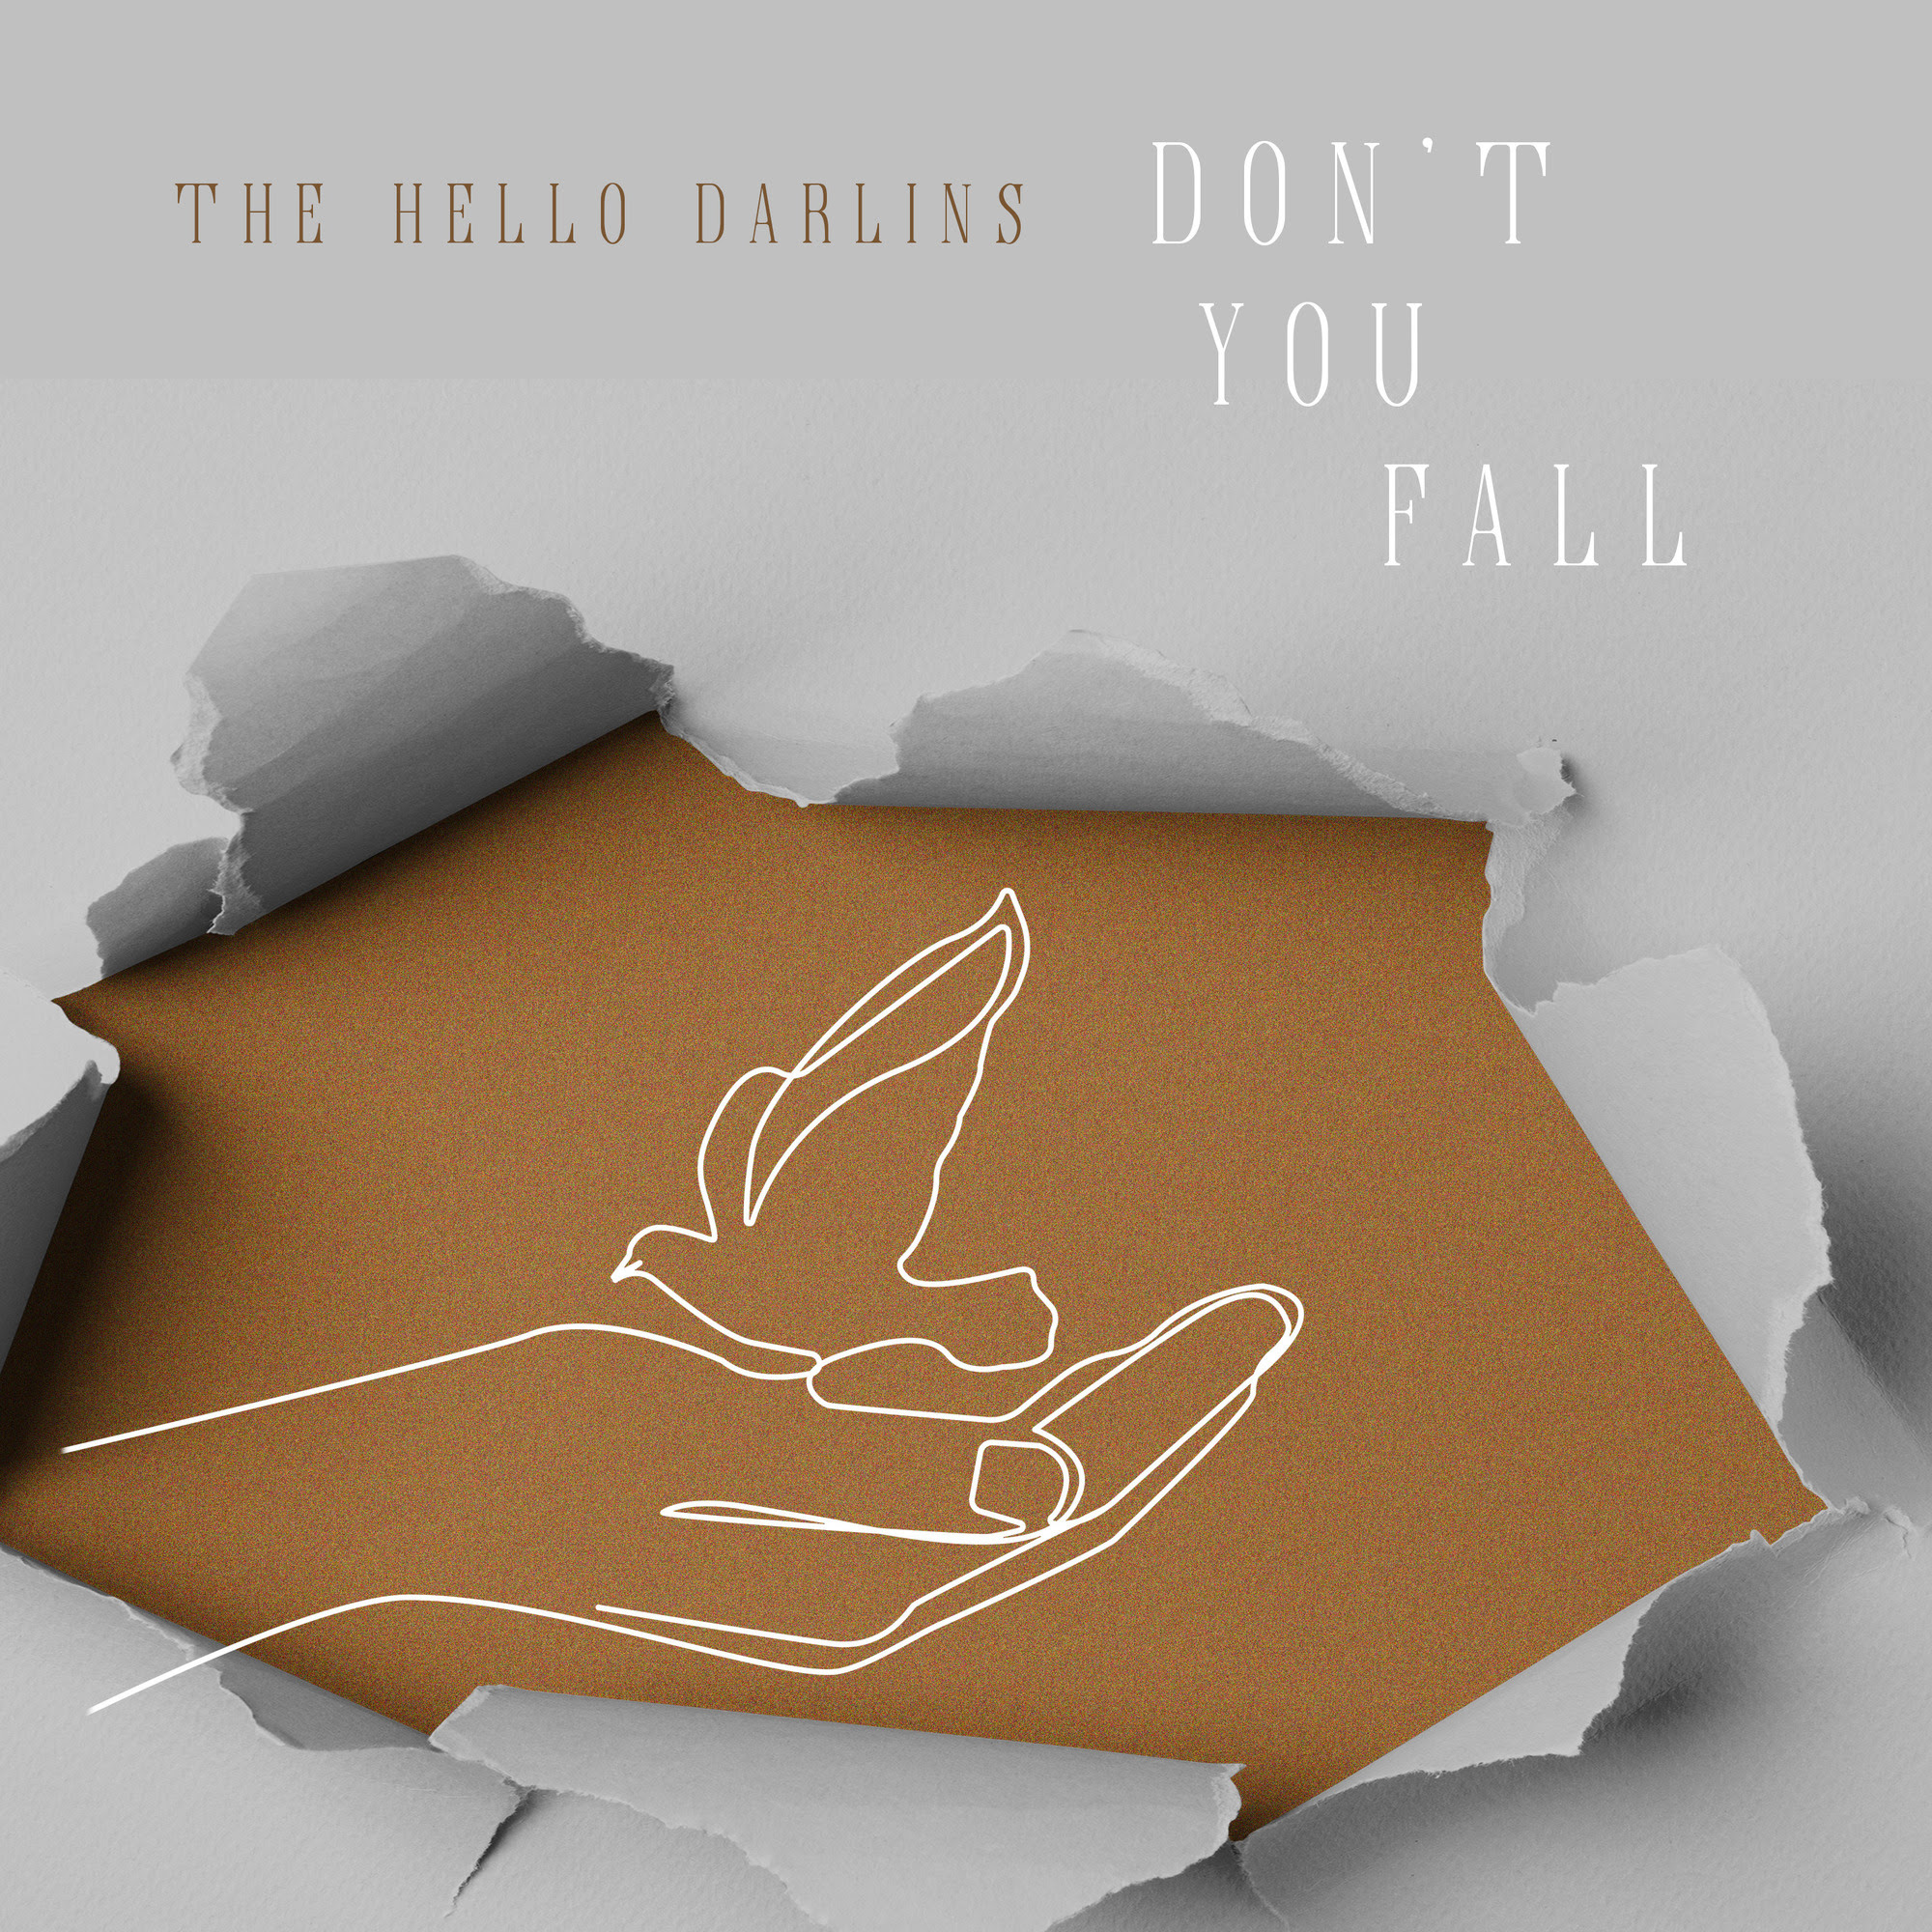 THE HELLO DARLINS release new single "Don't You Fall" from upcoming sophomore album The Alders & The Ashes